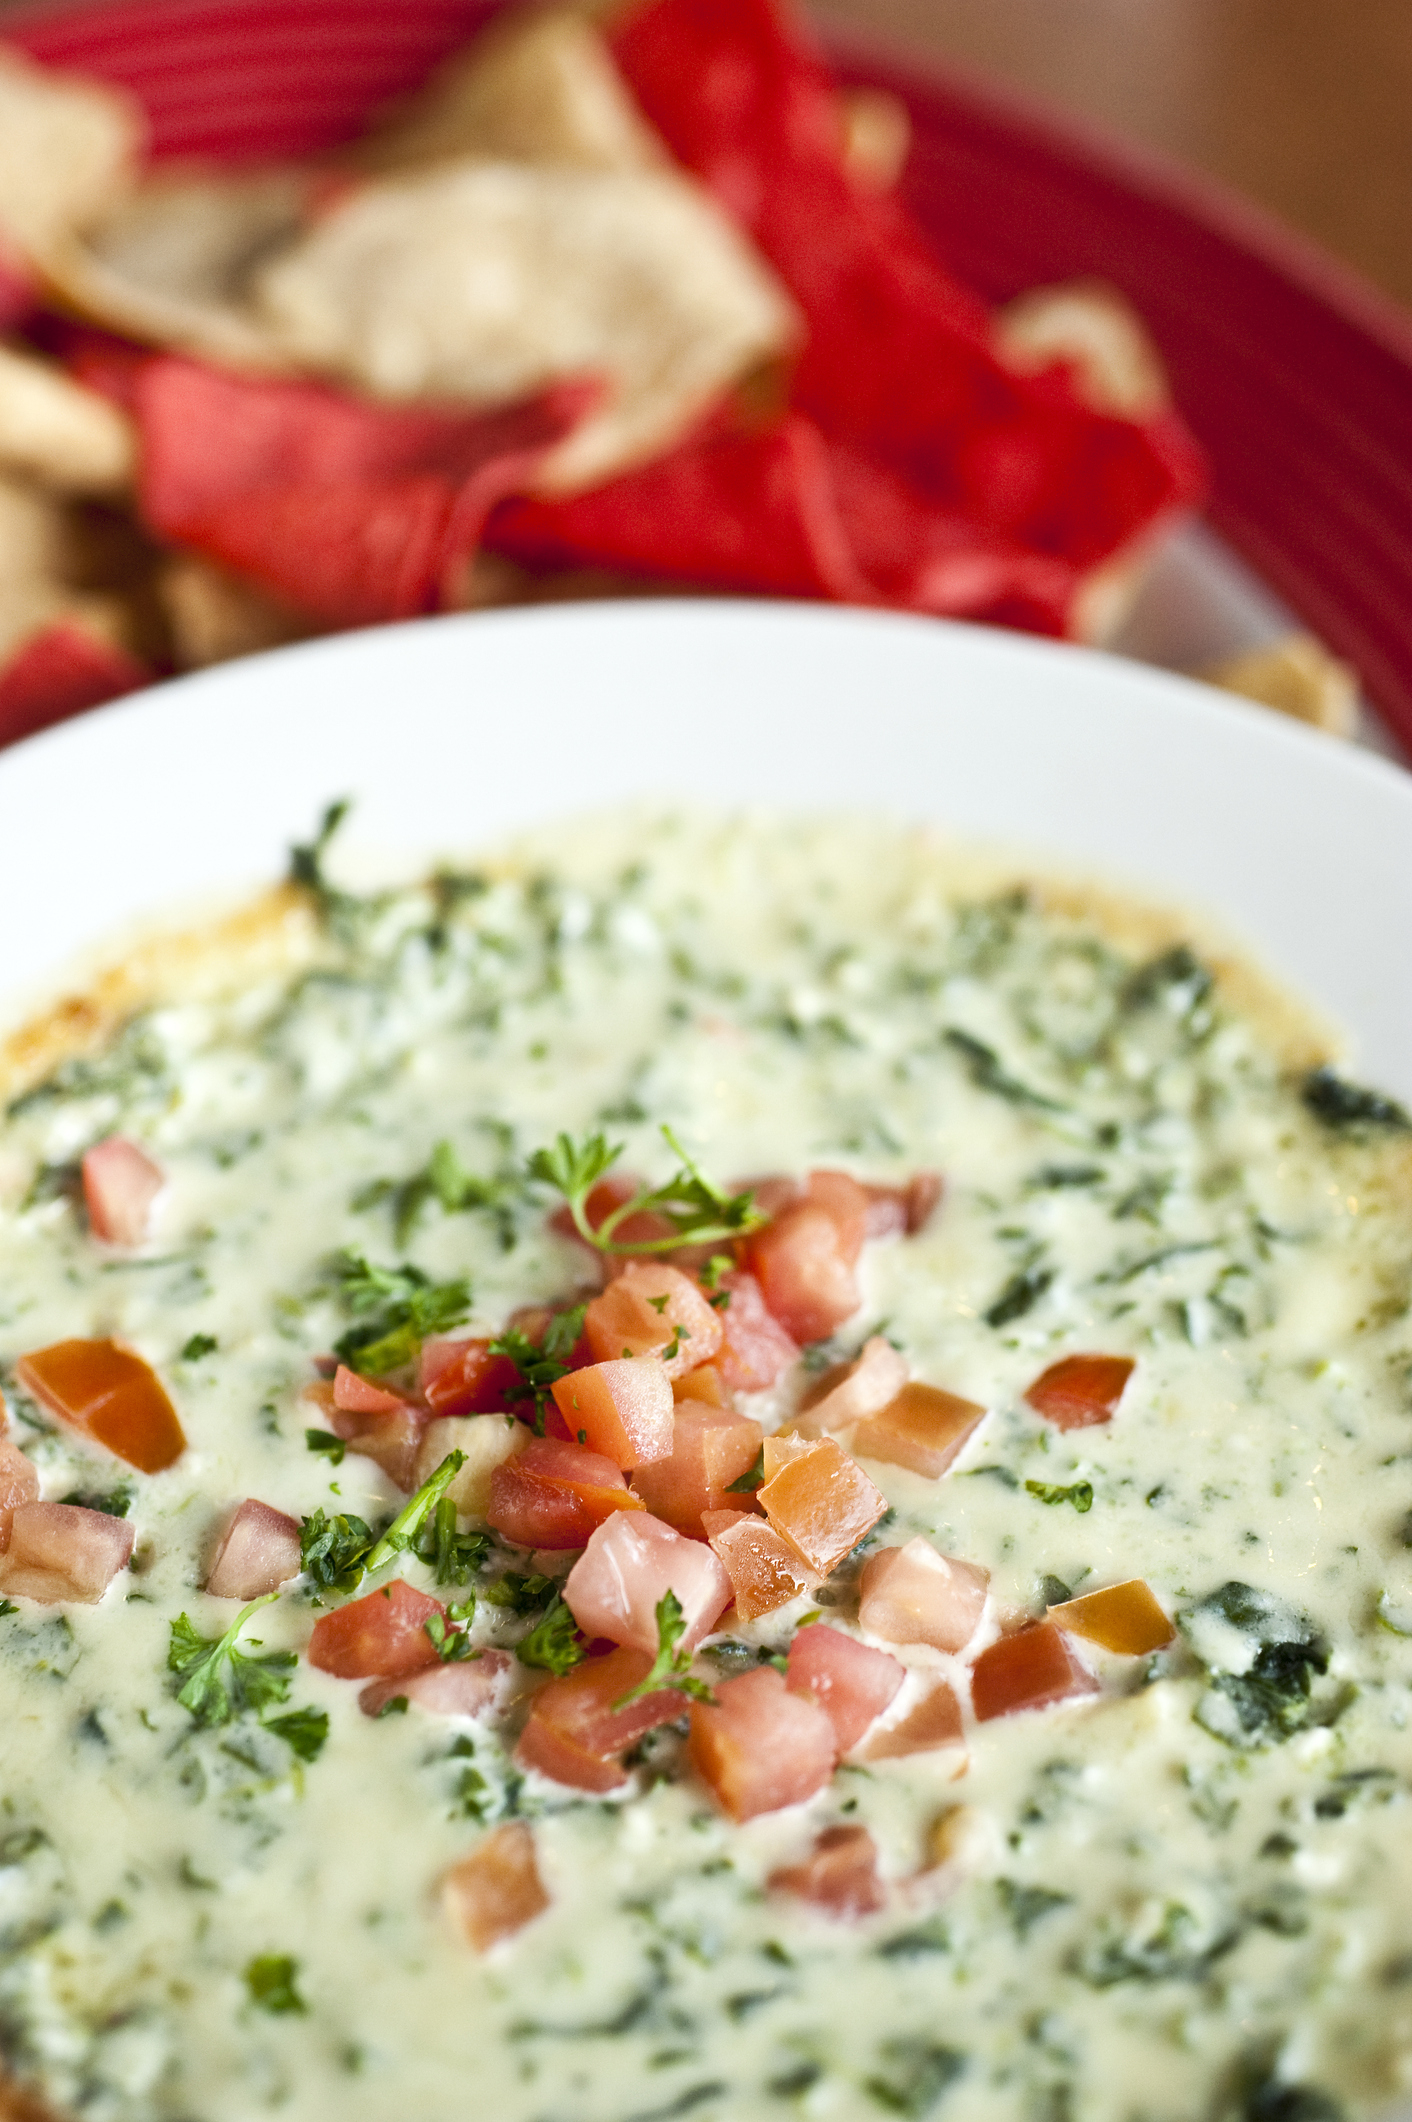 Spinach dip in a white bowl topped with diced tomatoes, served with tortilla chips